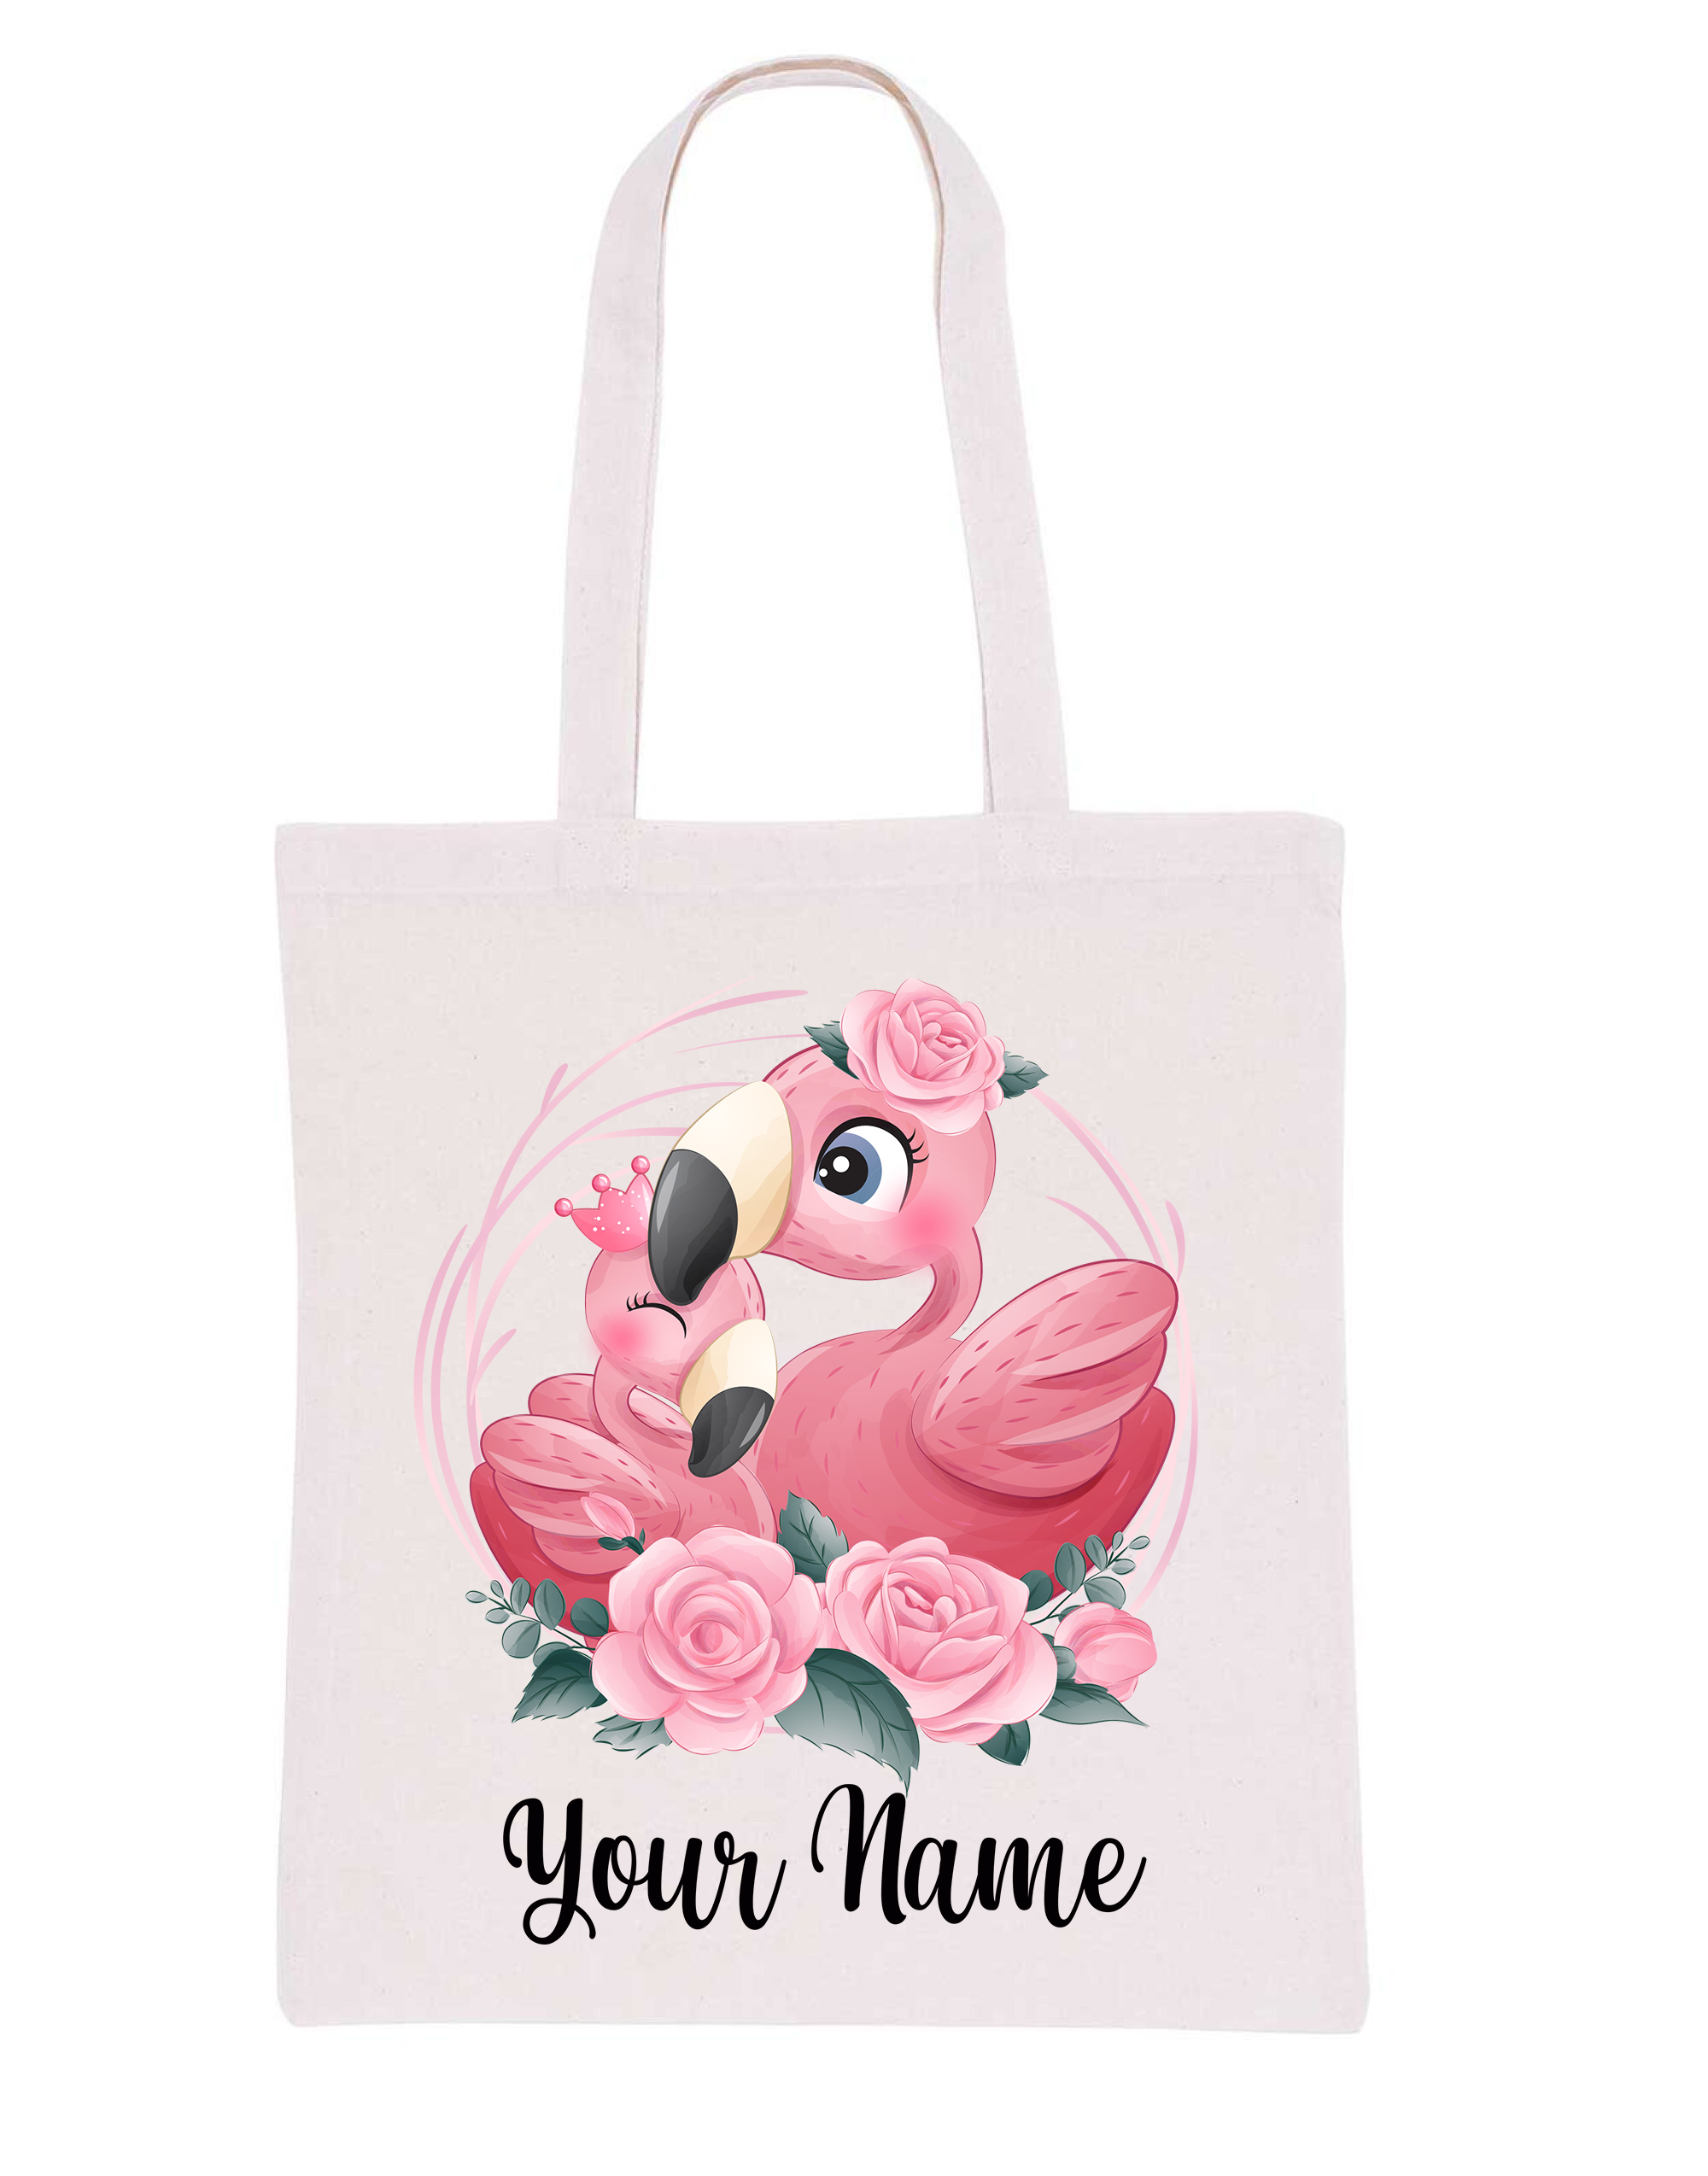 Personalised Name Tote Bag Butterfly Canvas Cotton Shopper Shopping